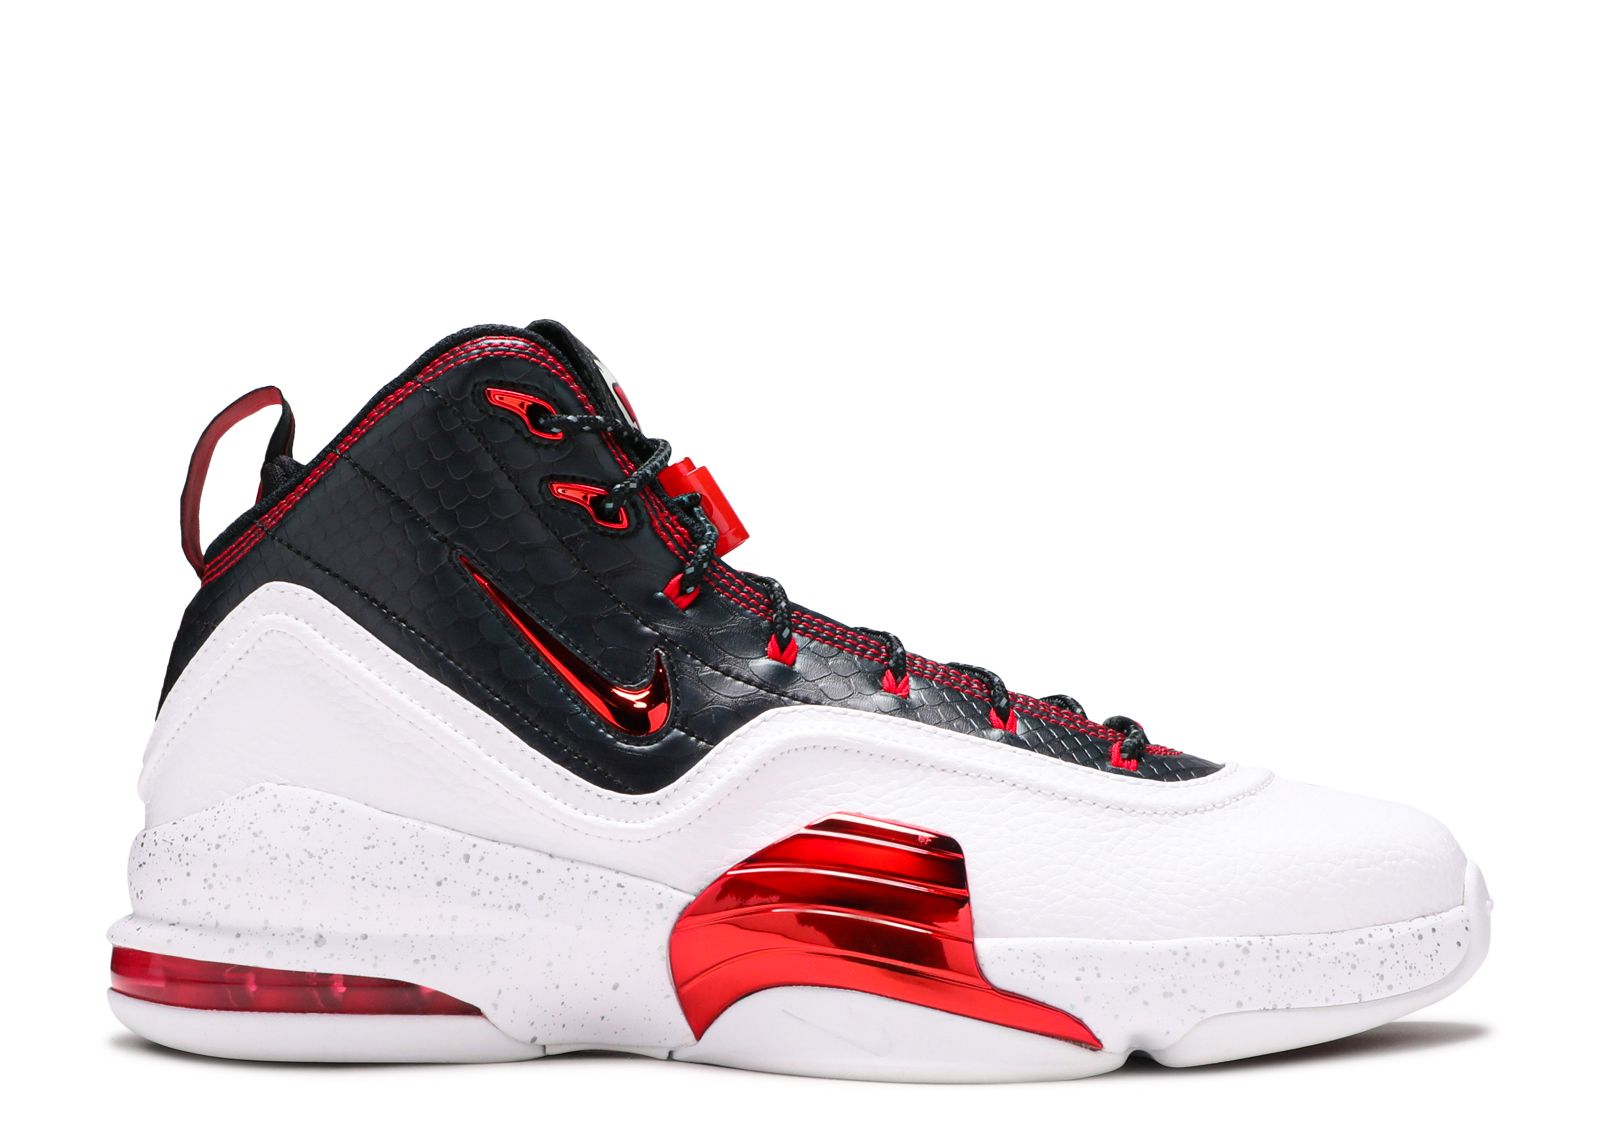 huile brute Tradition nike air pippen 6 